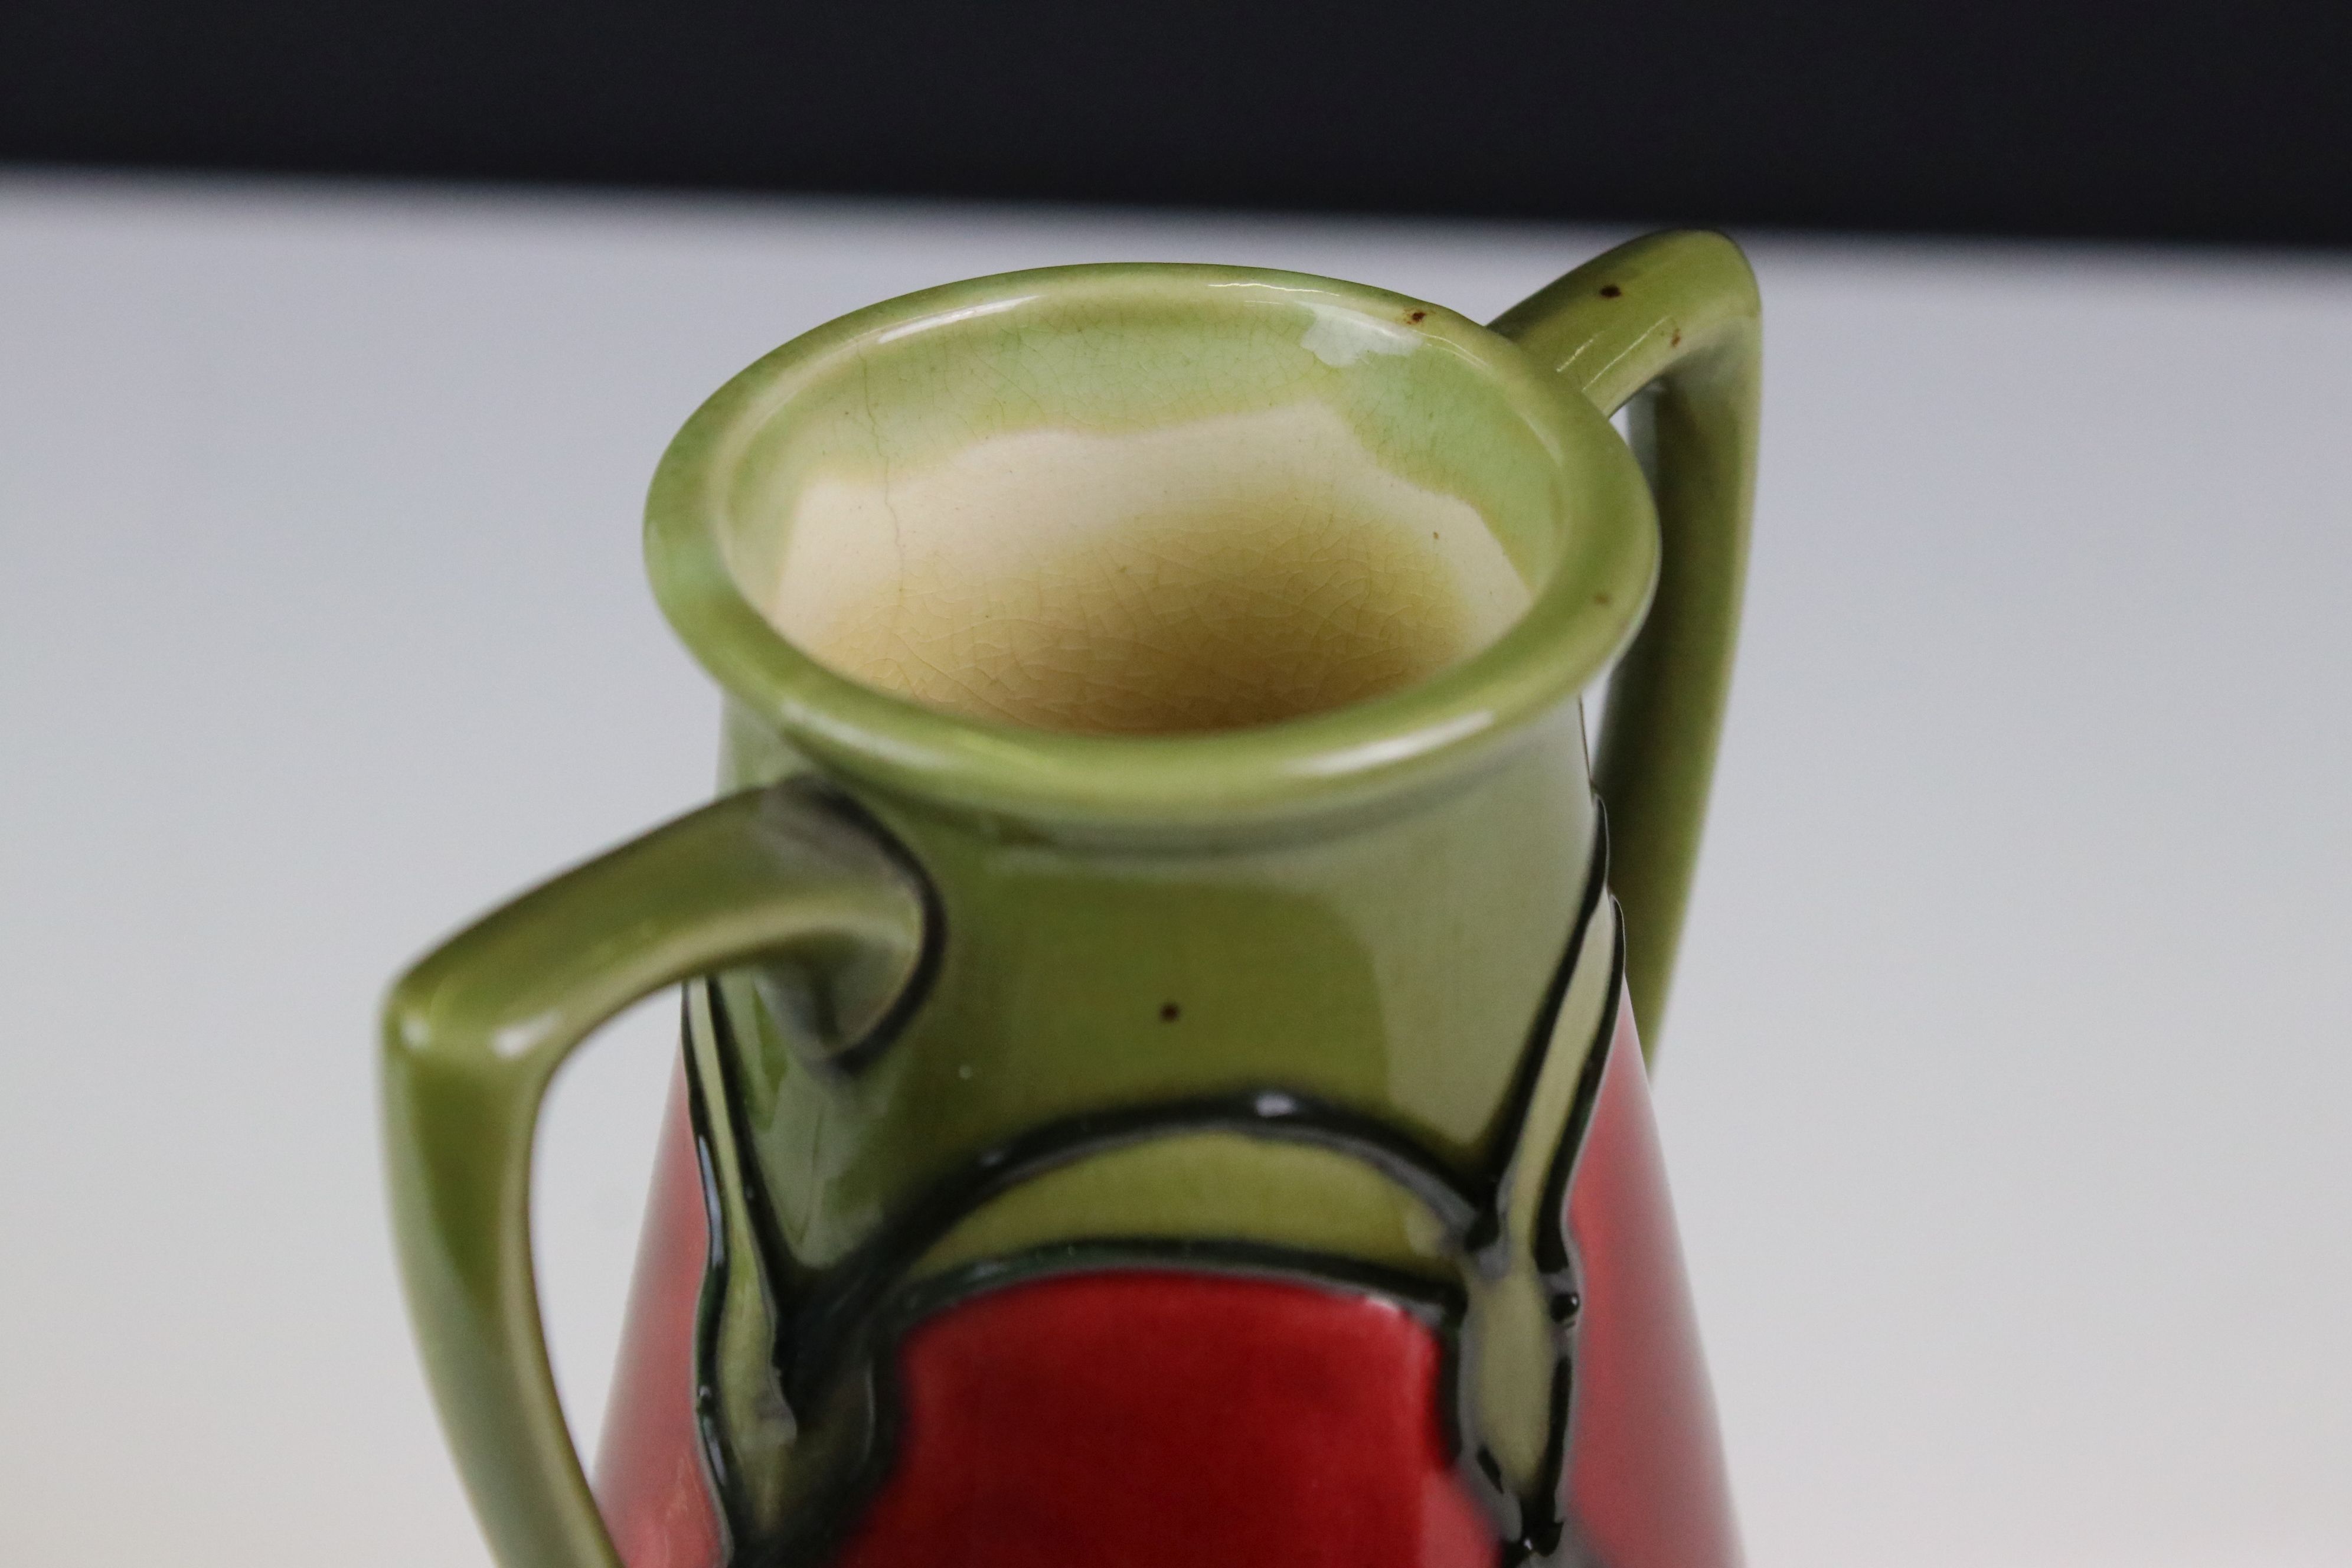 Minton Secessionist Red and Green Glazed Twin Handled Vase, marked No. 12 to base, 21cm high - Image 5 of 7